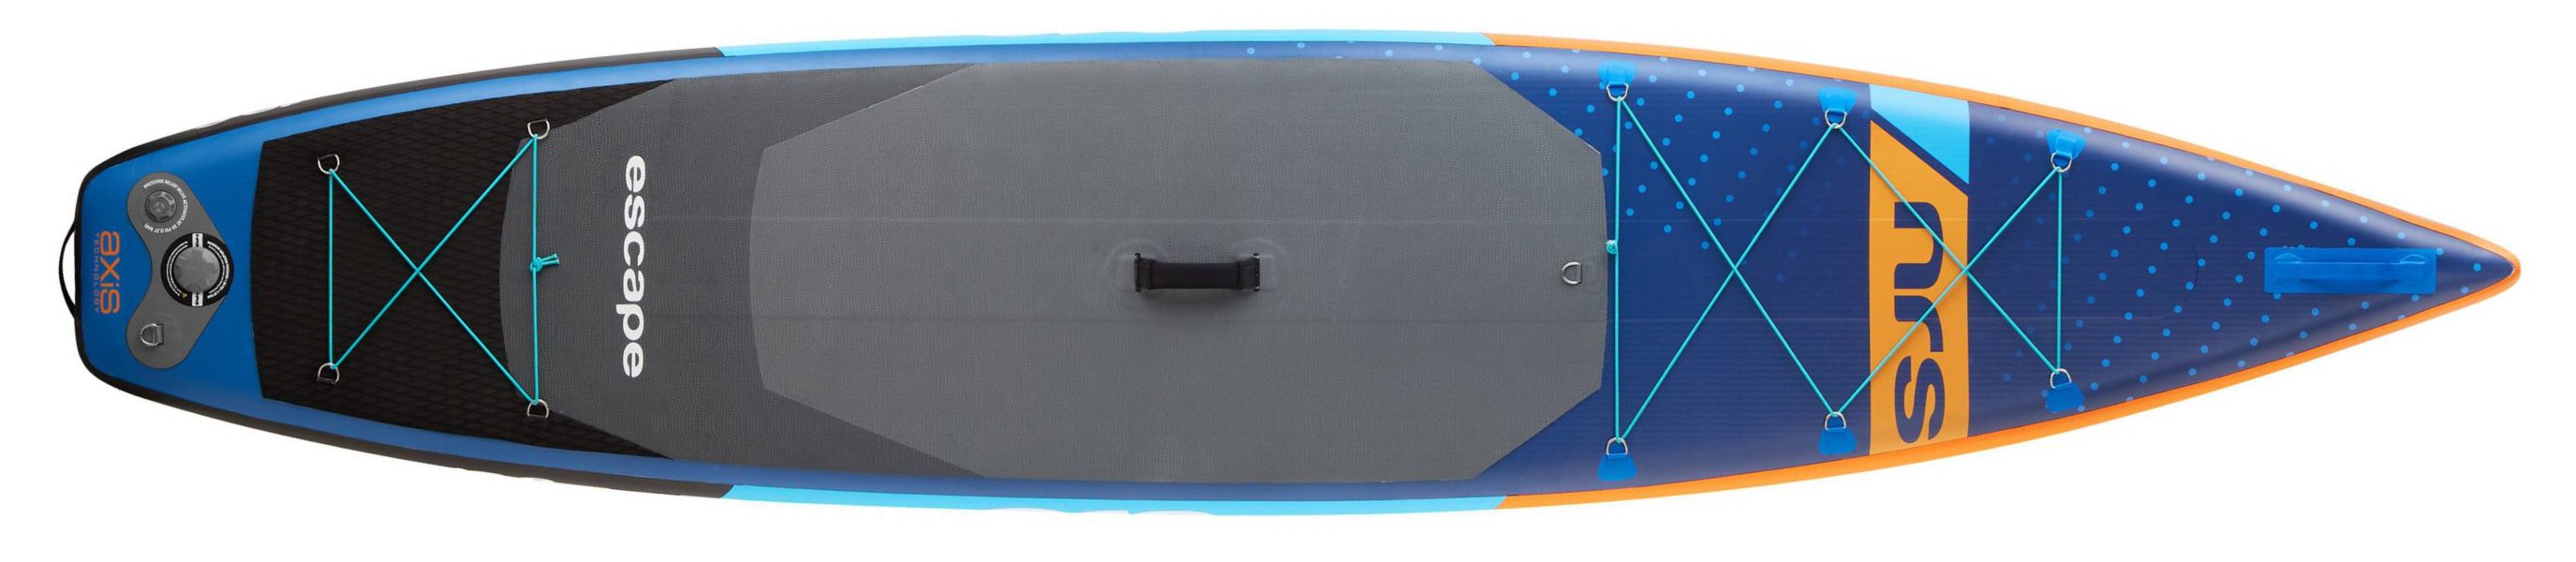 NRS Escape Inflatable SUP